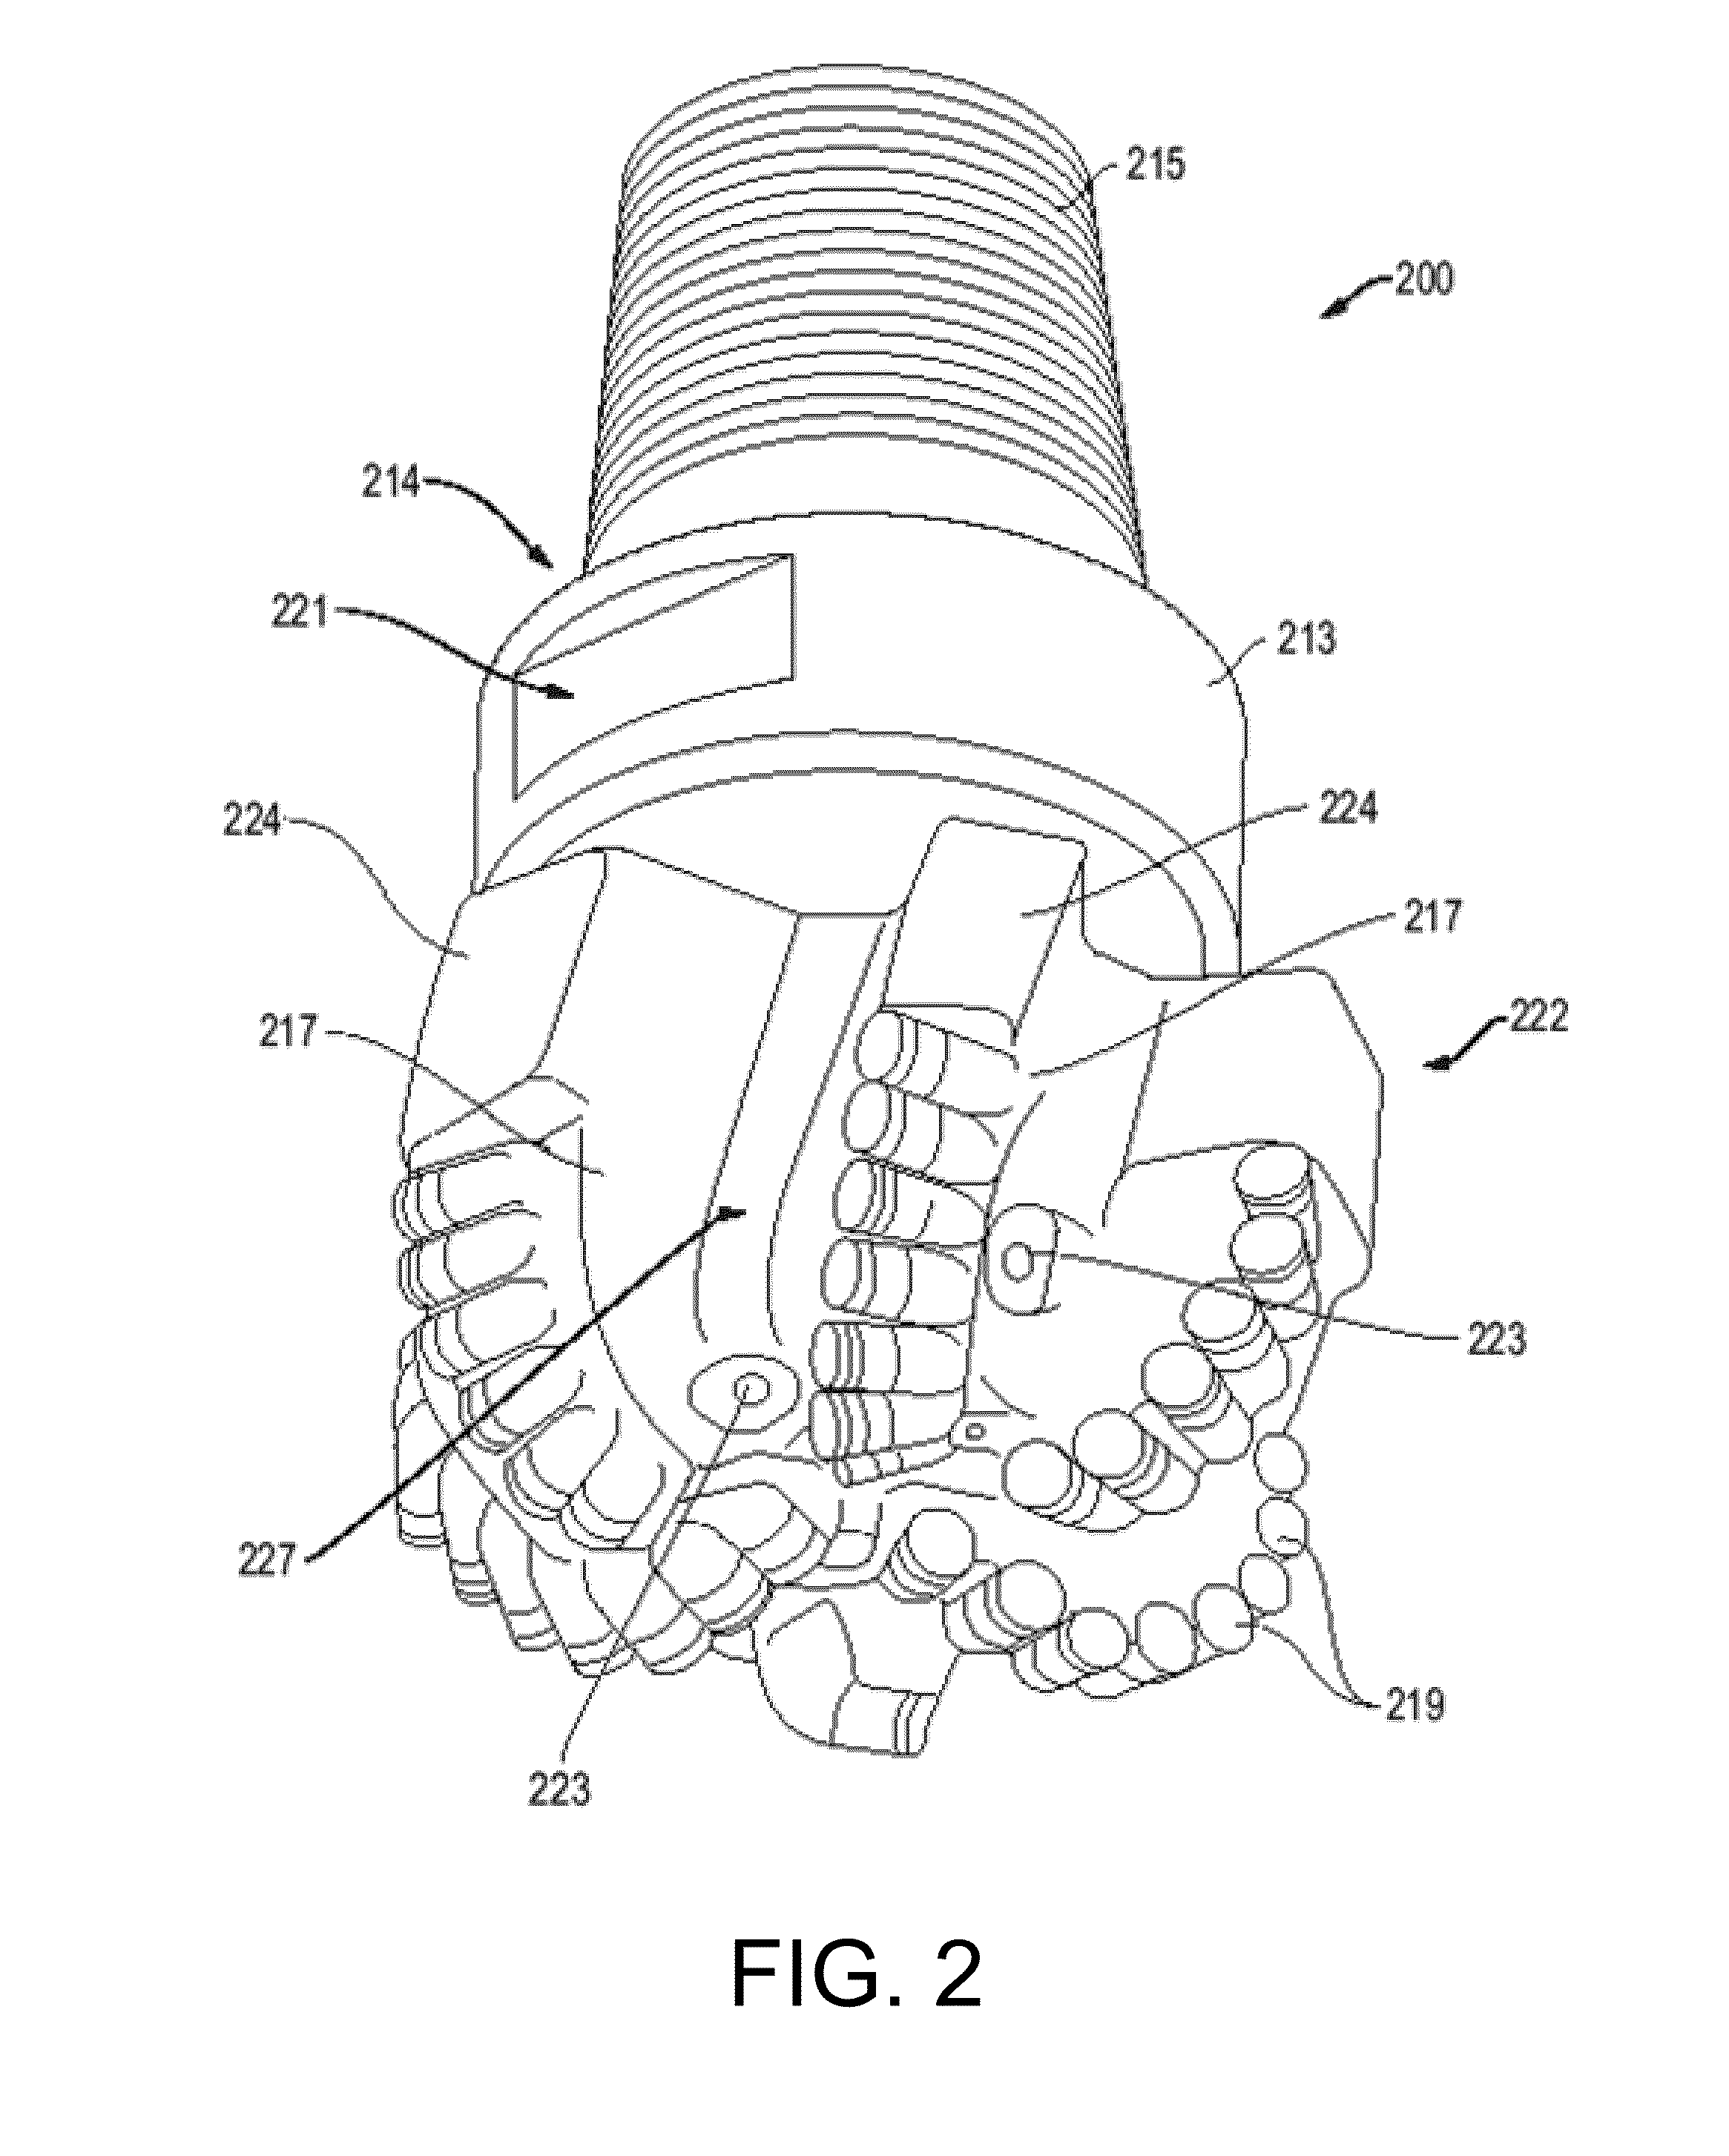 Cutting element for a drill bit used in drilling subterranean formations